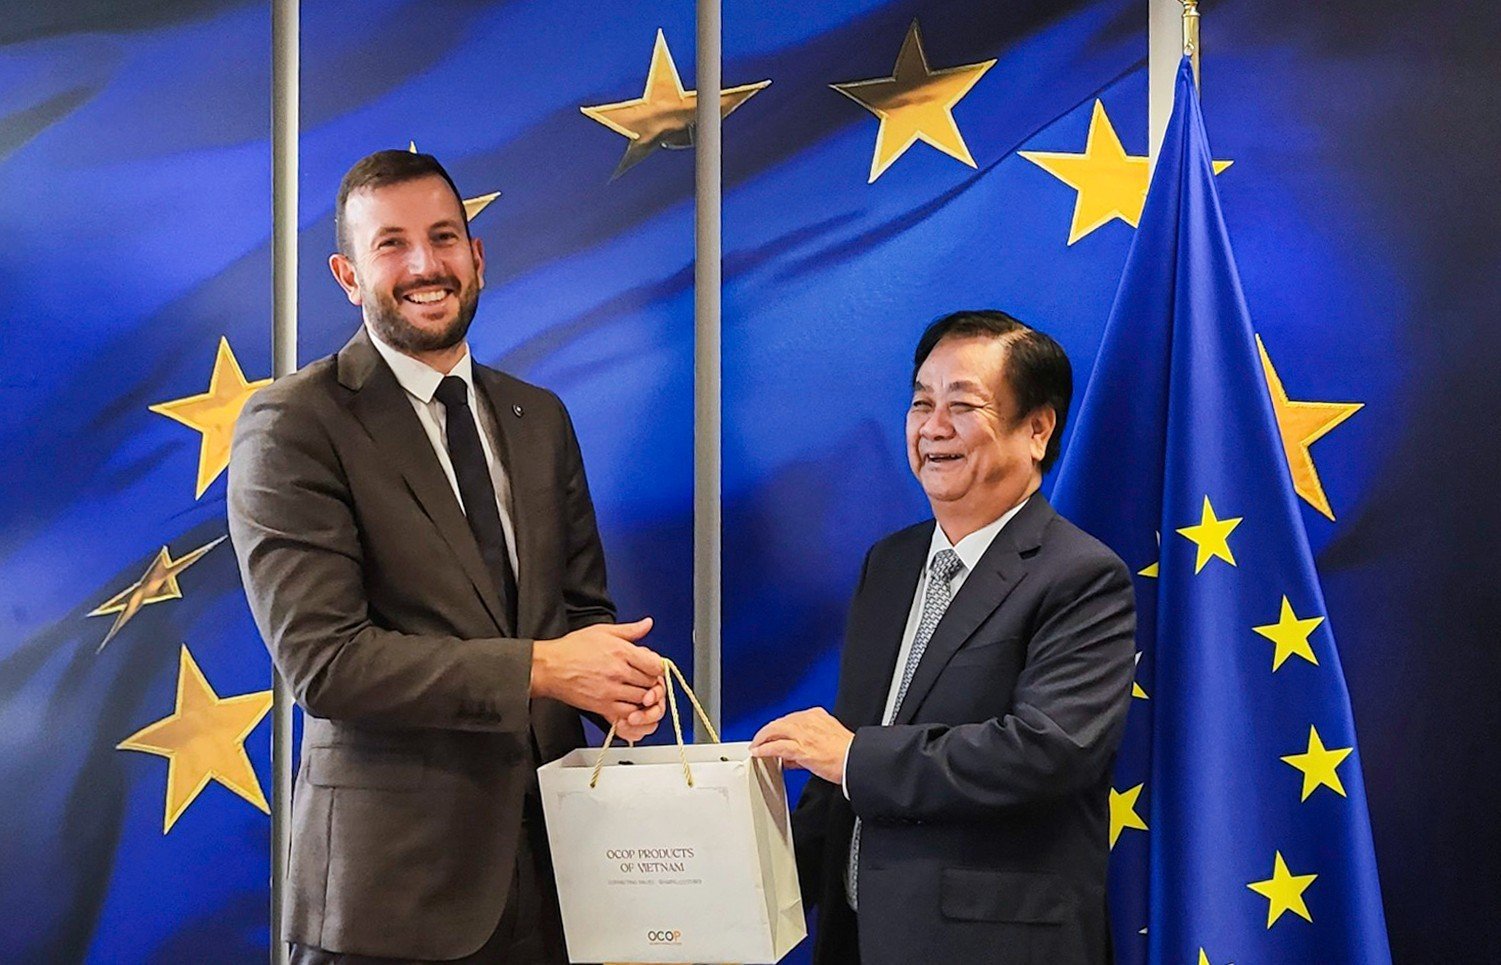 Minister Le Minh Hoan presented an OCOP product as a souvenir to the European Commissioner for Environment, Oceans and Fisheries Virginijus Sinkevičius. Photo: Anh Tuan.